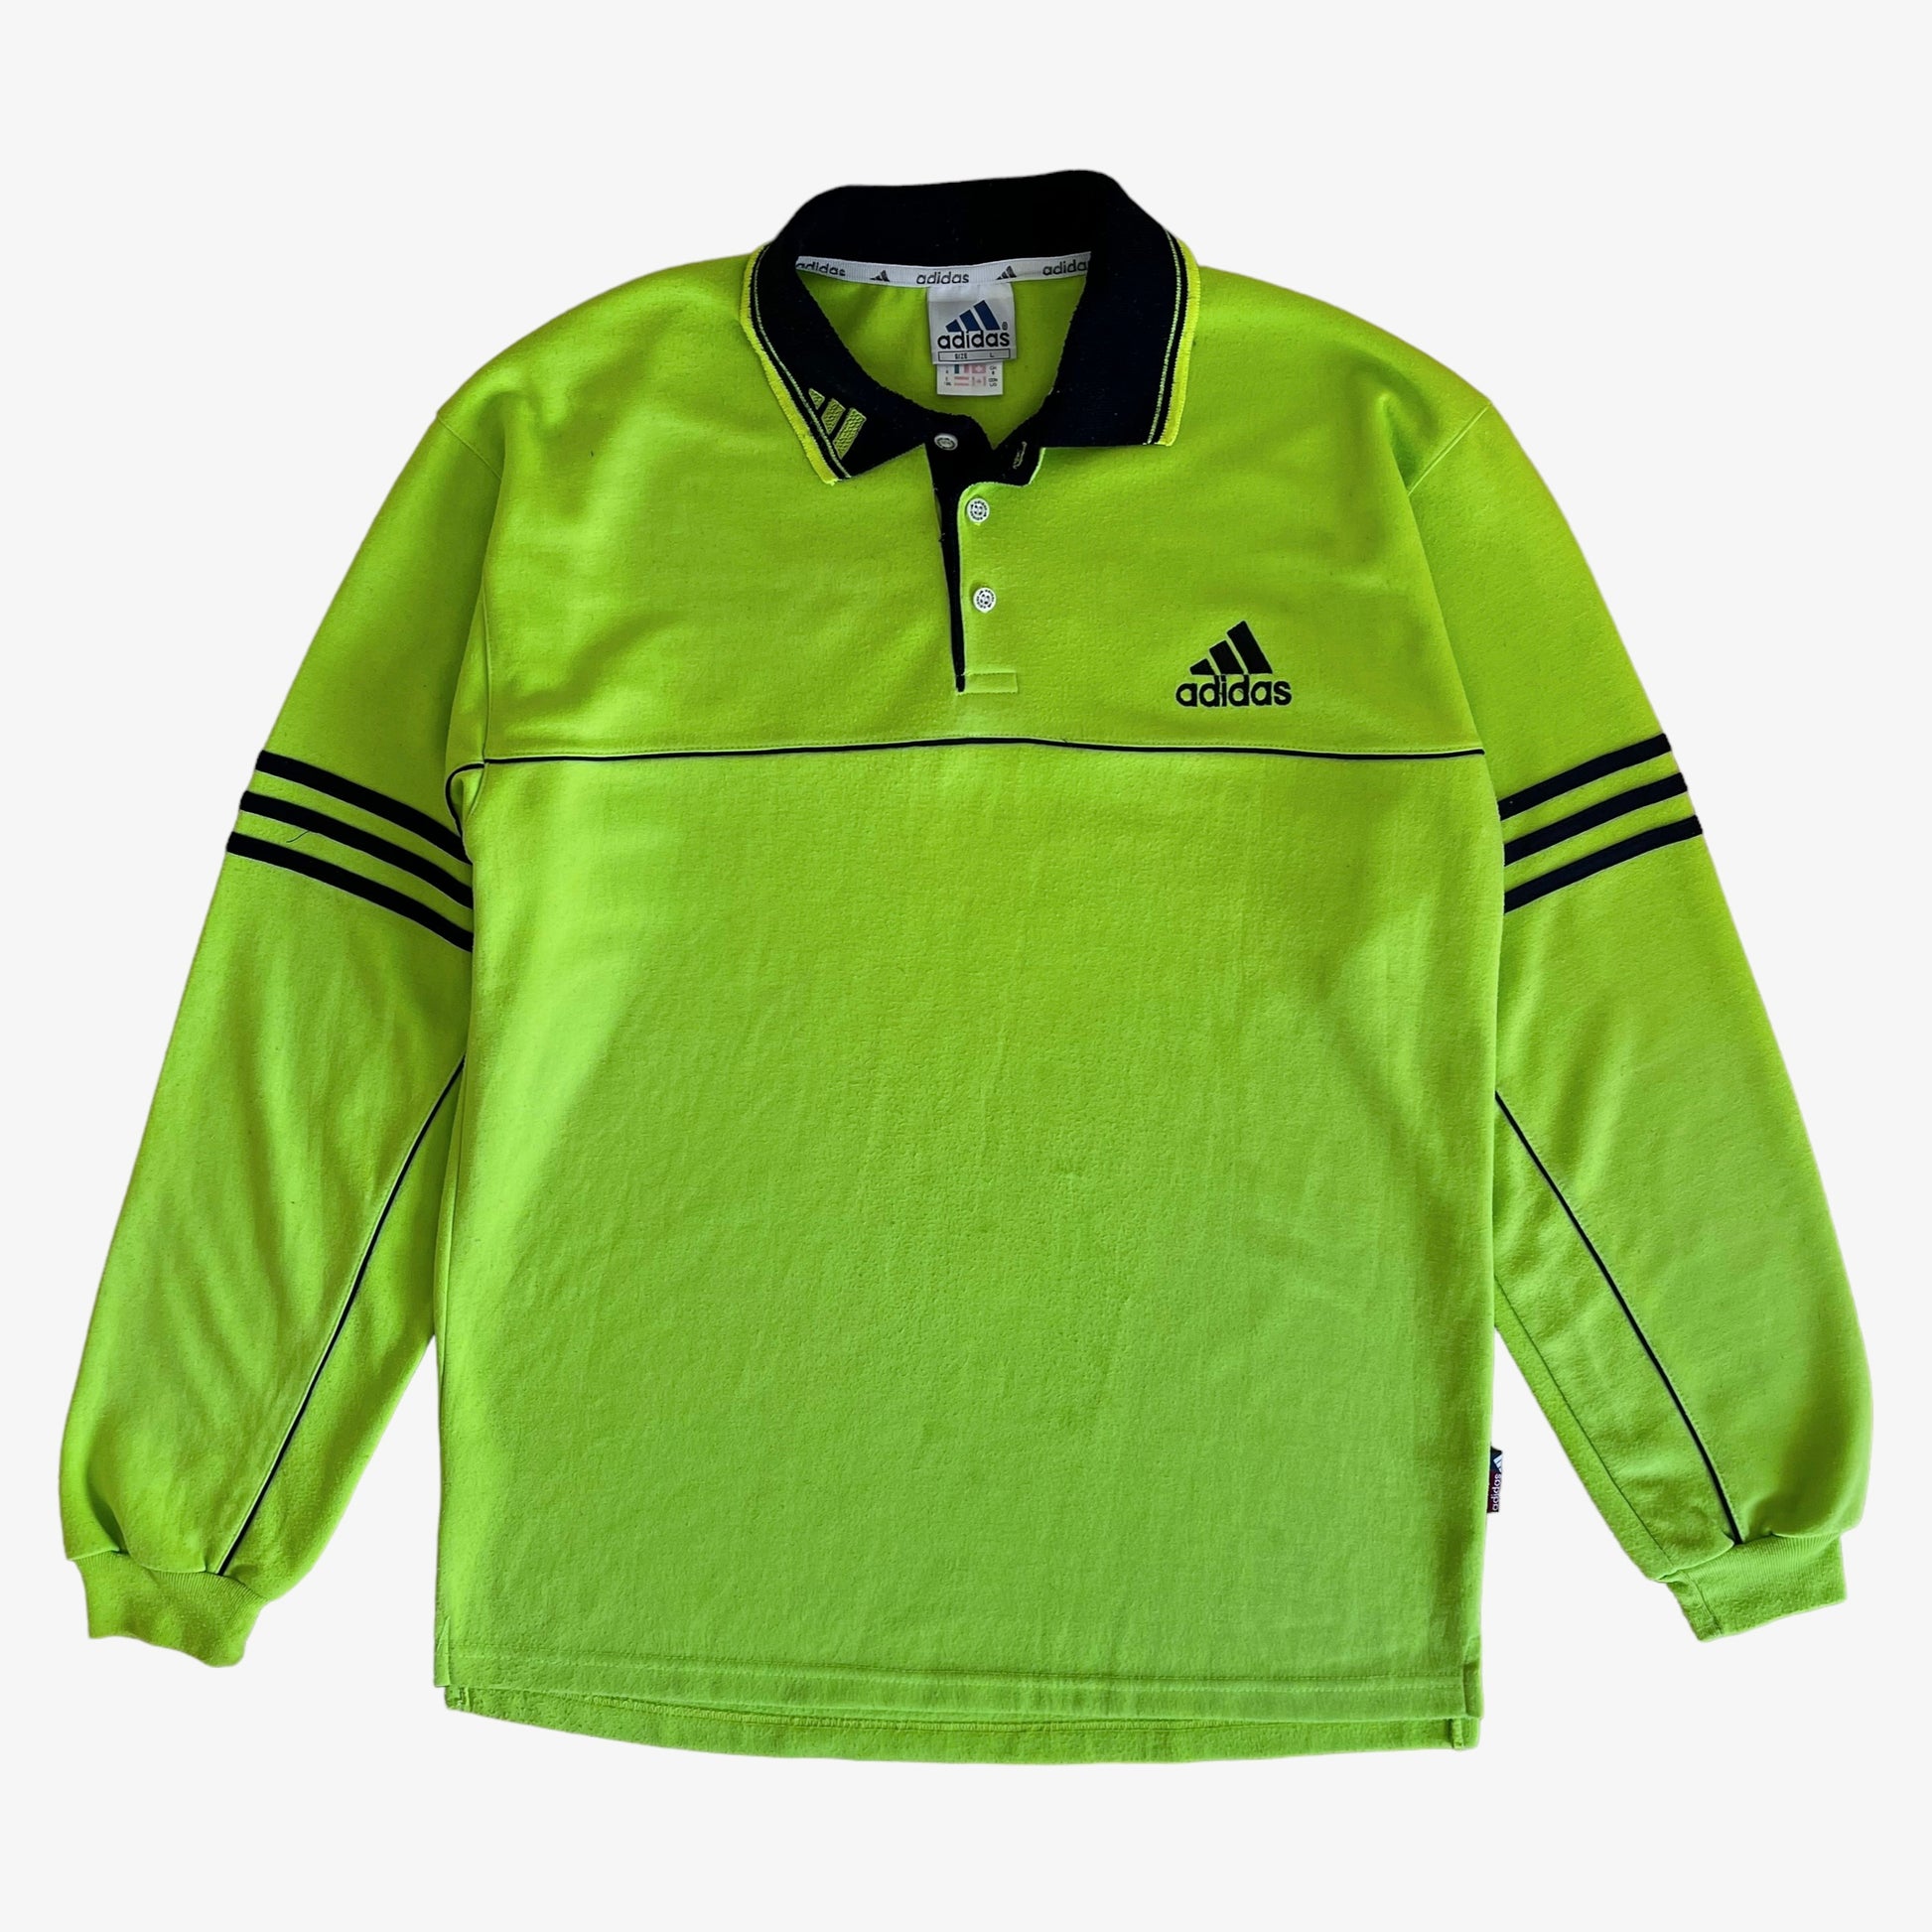 Vintage 90s Adidas Lime Green Rugby Shirt With Back Spell Out - Casspios Dream